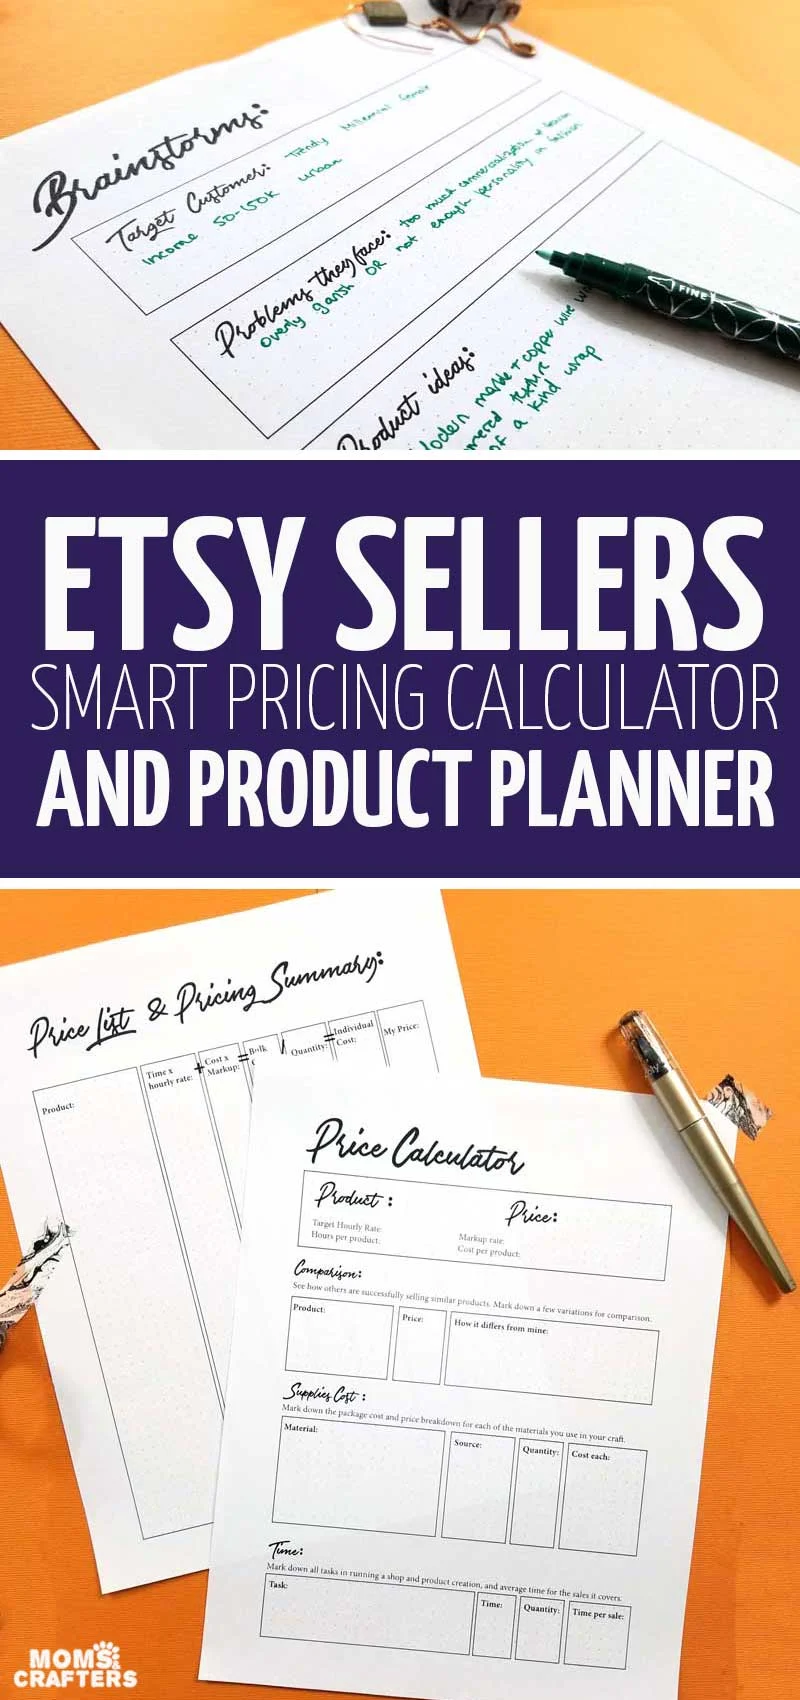 Download this smart pricing calculator for Etsy sellers that takes into account EVERYTHING! This is such a cool handmade goods calculator and crafting calculator for selling handmade jewelry, leather crafts, printables -anything really!